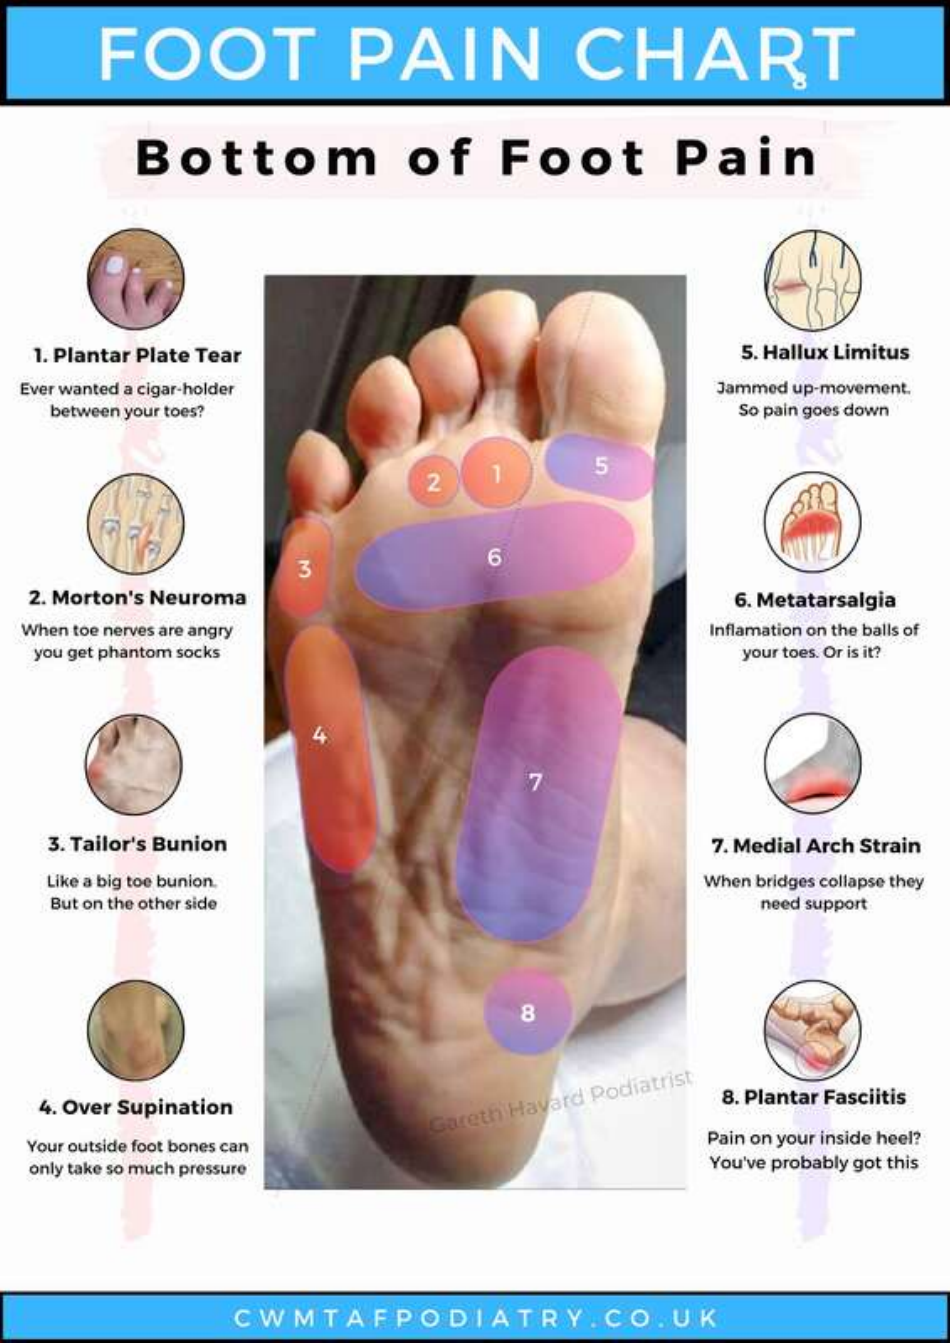 Foot Pain Chart - Bottom of Foot Pain, Page 1